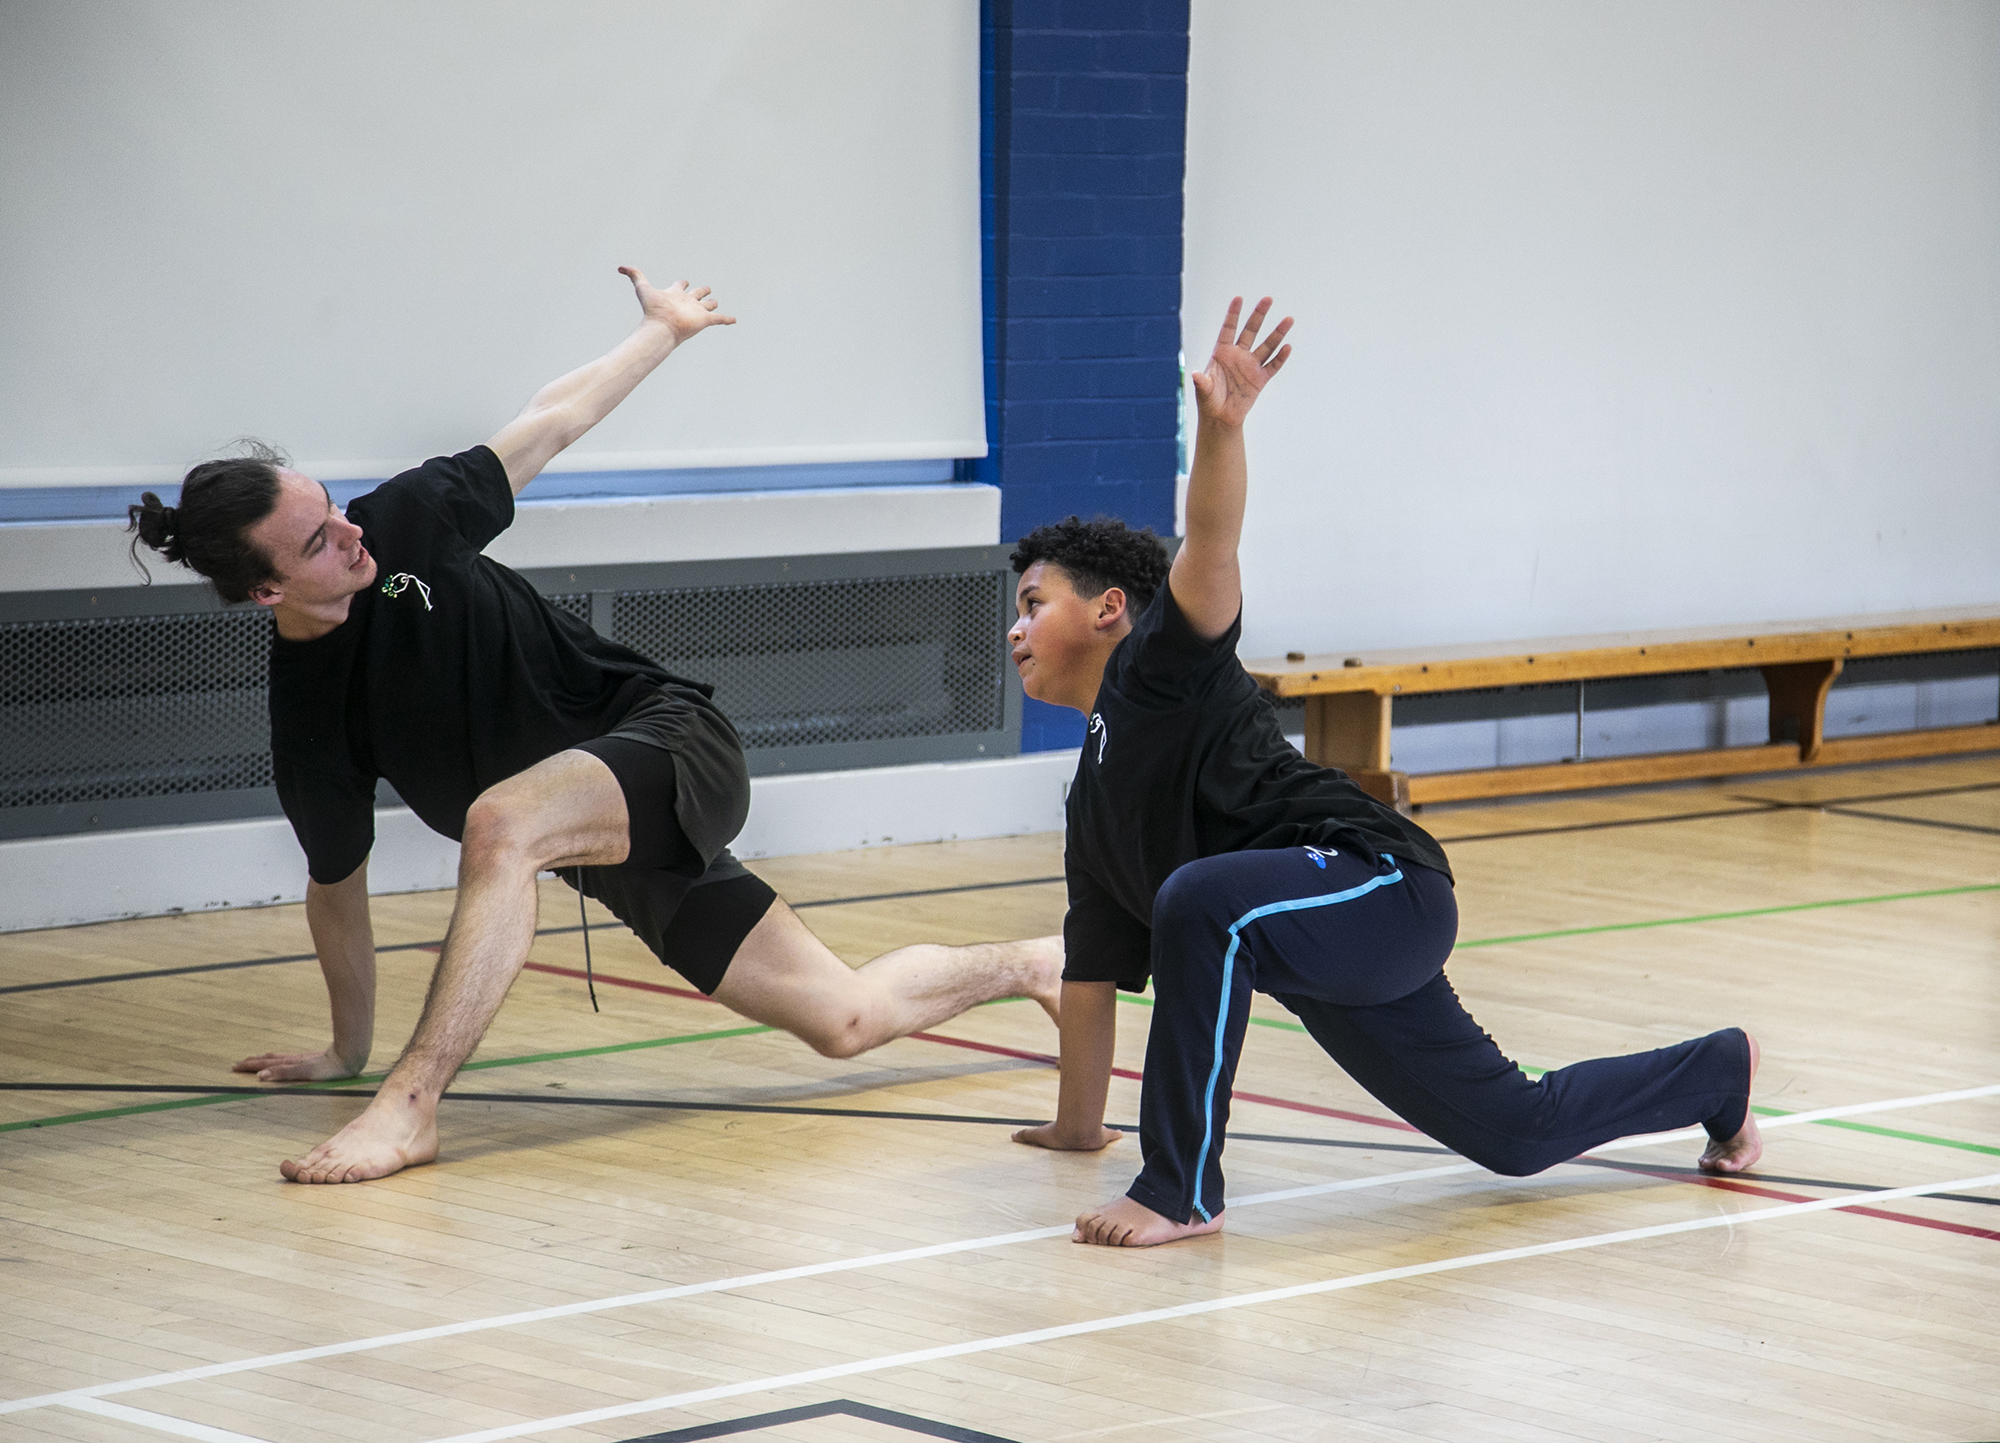 teenage male dance teacher lunging with one arm in the air teaching young boy dancer lunging with the mirrored arm in the air. In sports hall both wearing black PE kit